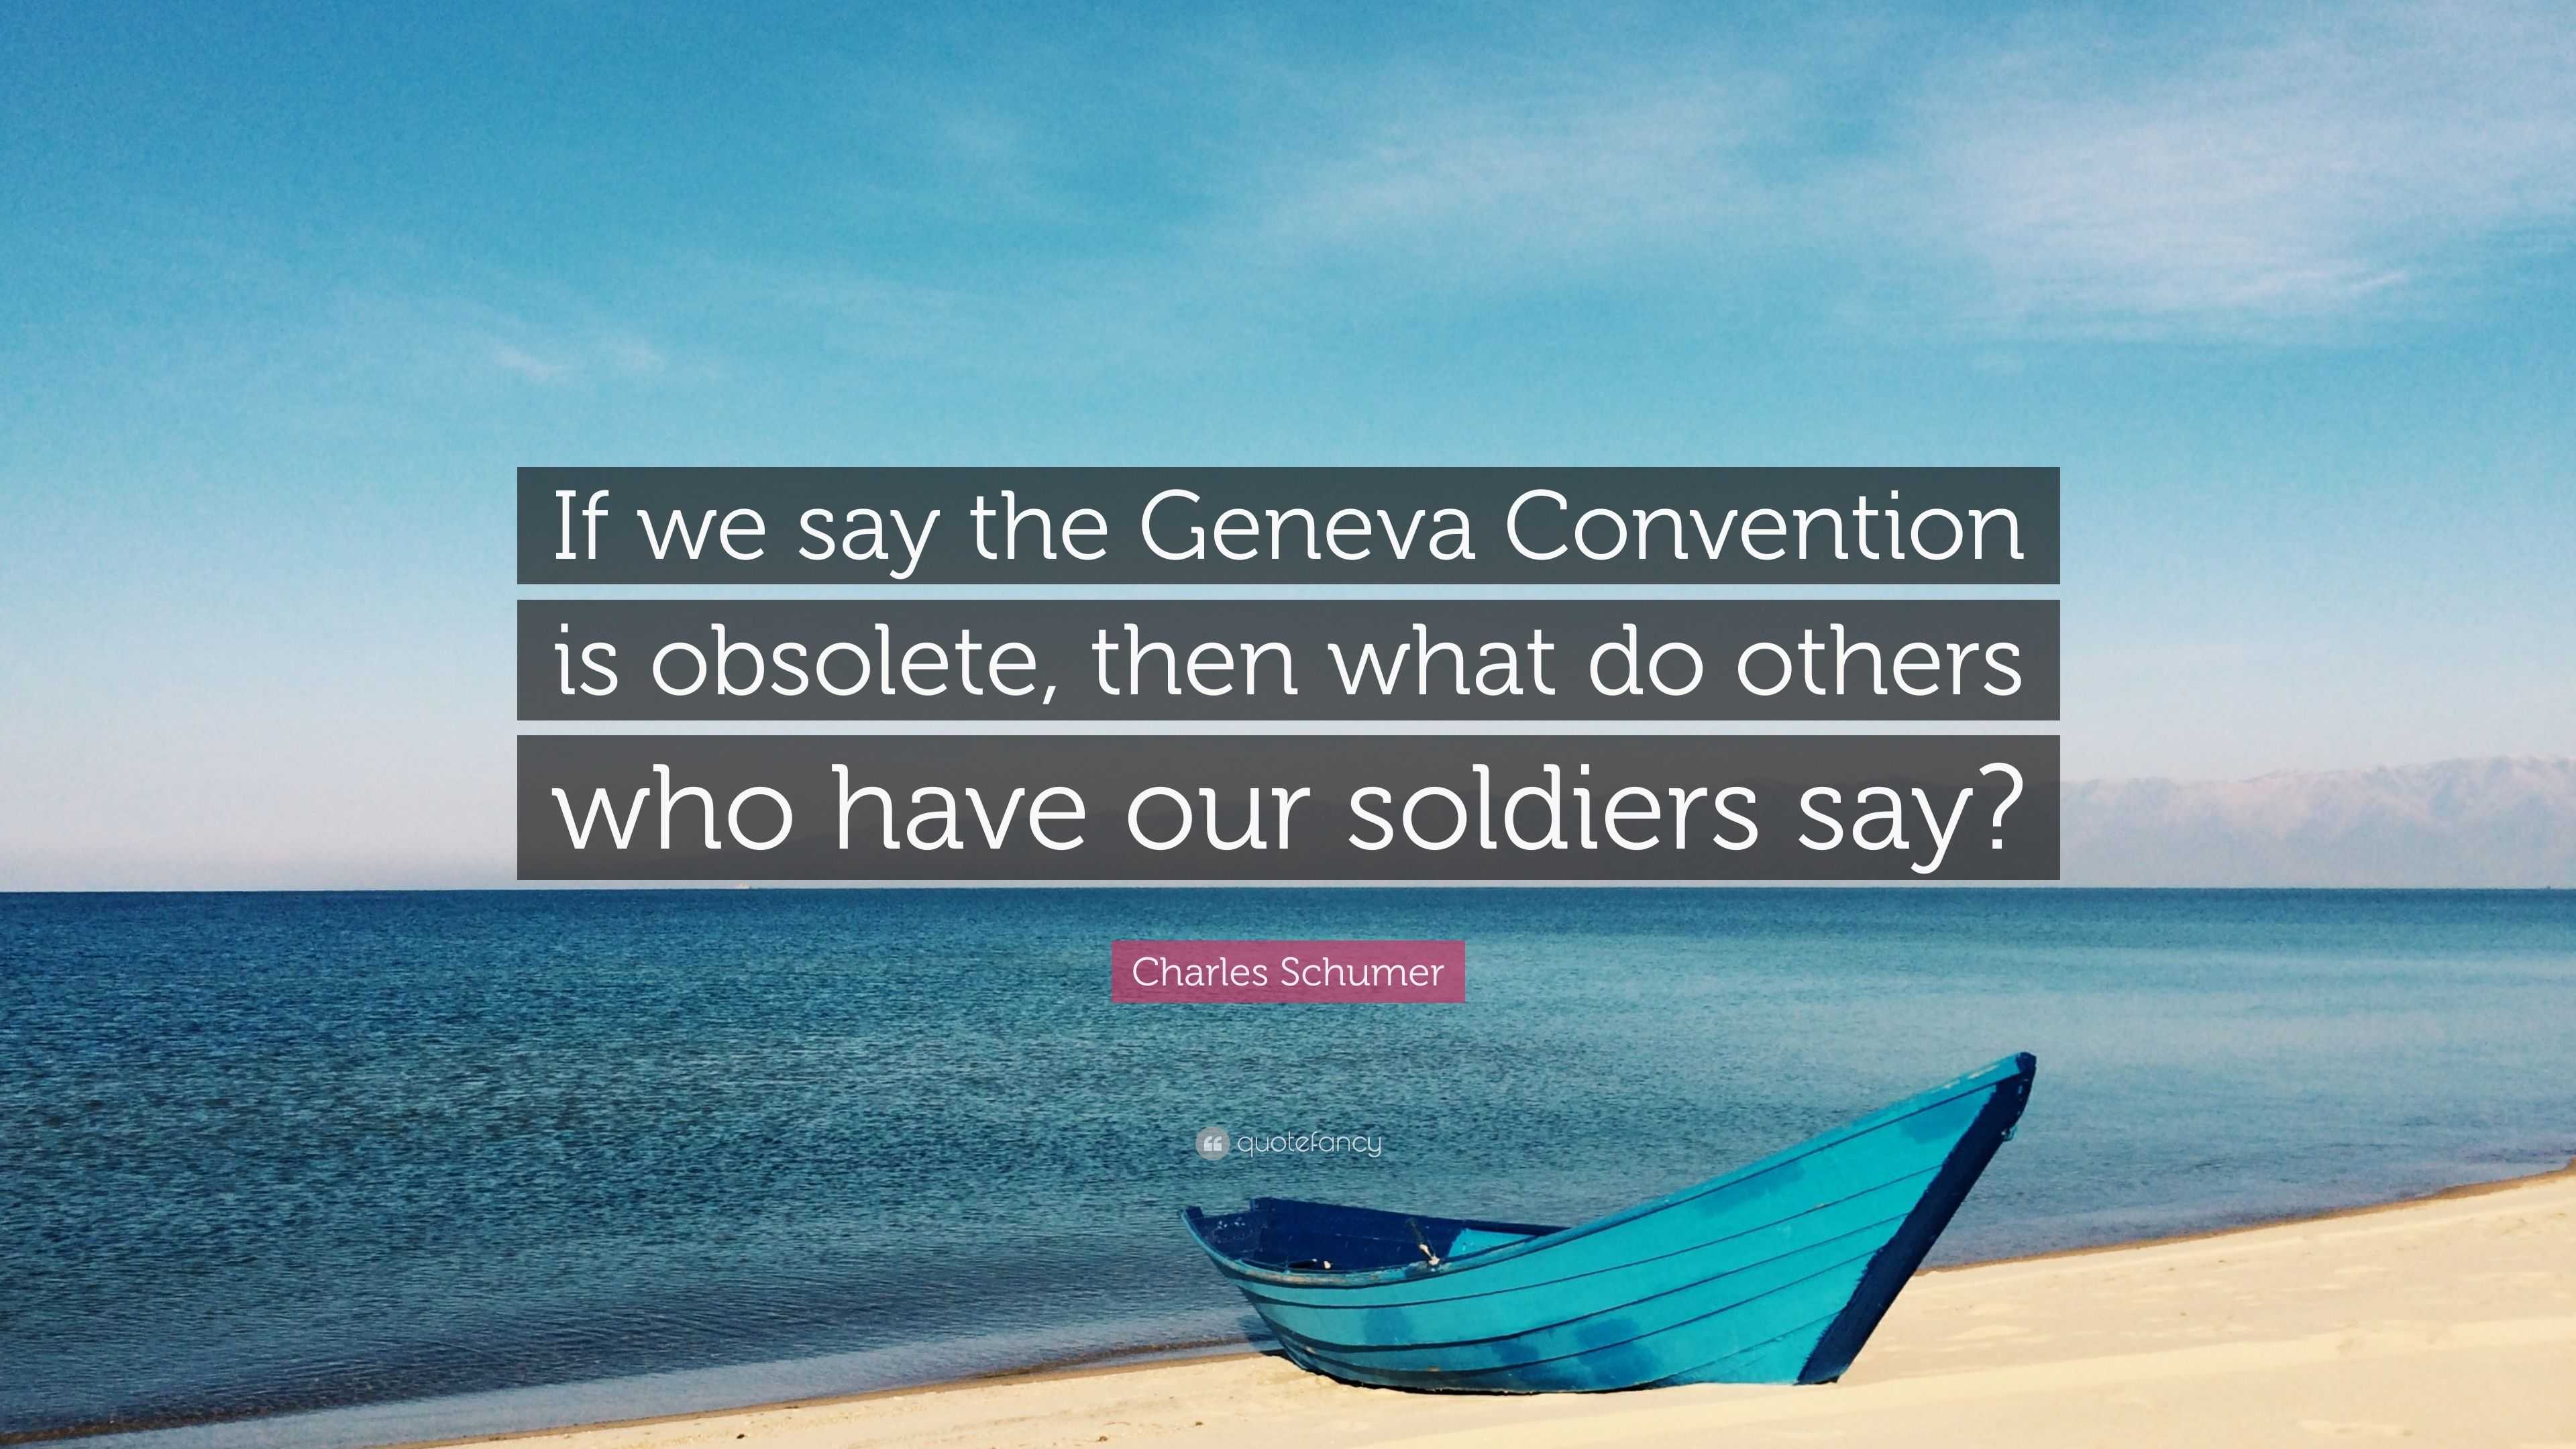 Charles Schumer Quote: “If we say the Geneva Convention is obsolete